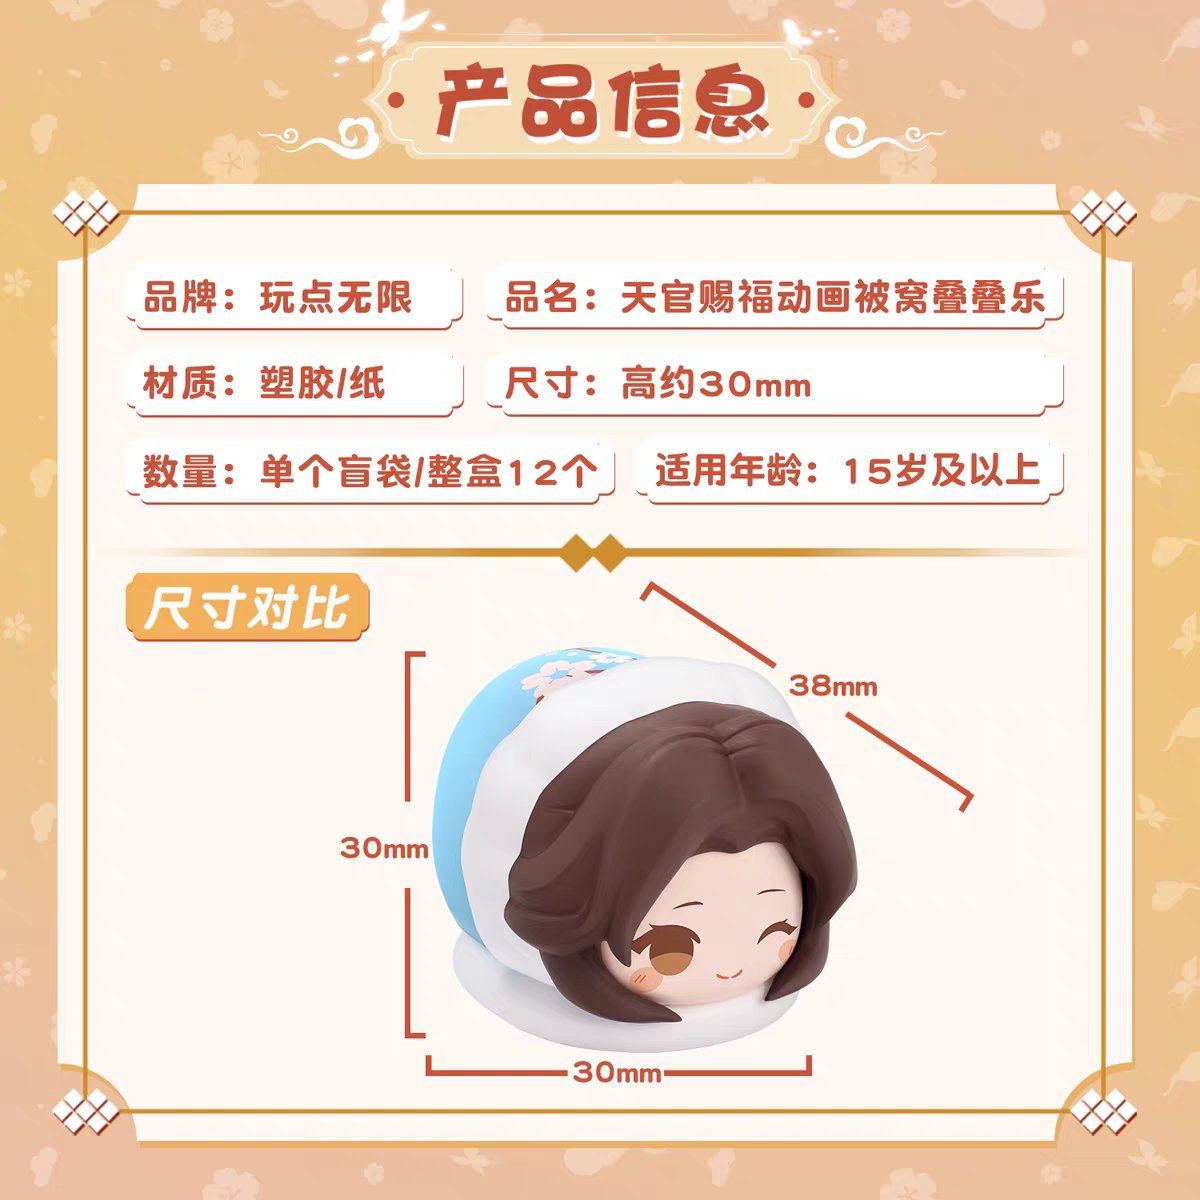 ⭐NEW!! The 玩点无限 x TGCF Donghua 被窝叠叠乐 series of cozy stackables goes on sale 4/27 @ 0000 CN!! 🥳🛌💖 Blind individual pick or purchase the whole box of 12! If you buy the whole box get a special Taizi Dianxia fig!!⭐

Link: m.tb.cn/h.UGcP8iV?tk=s…